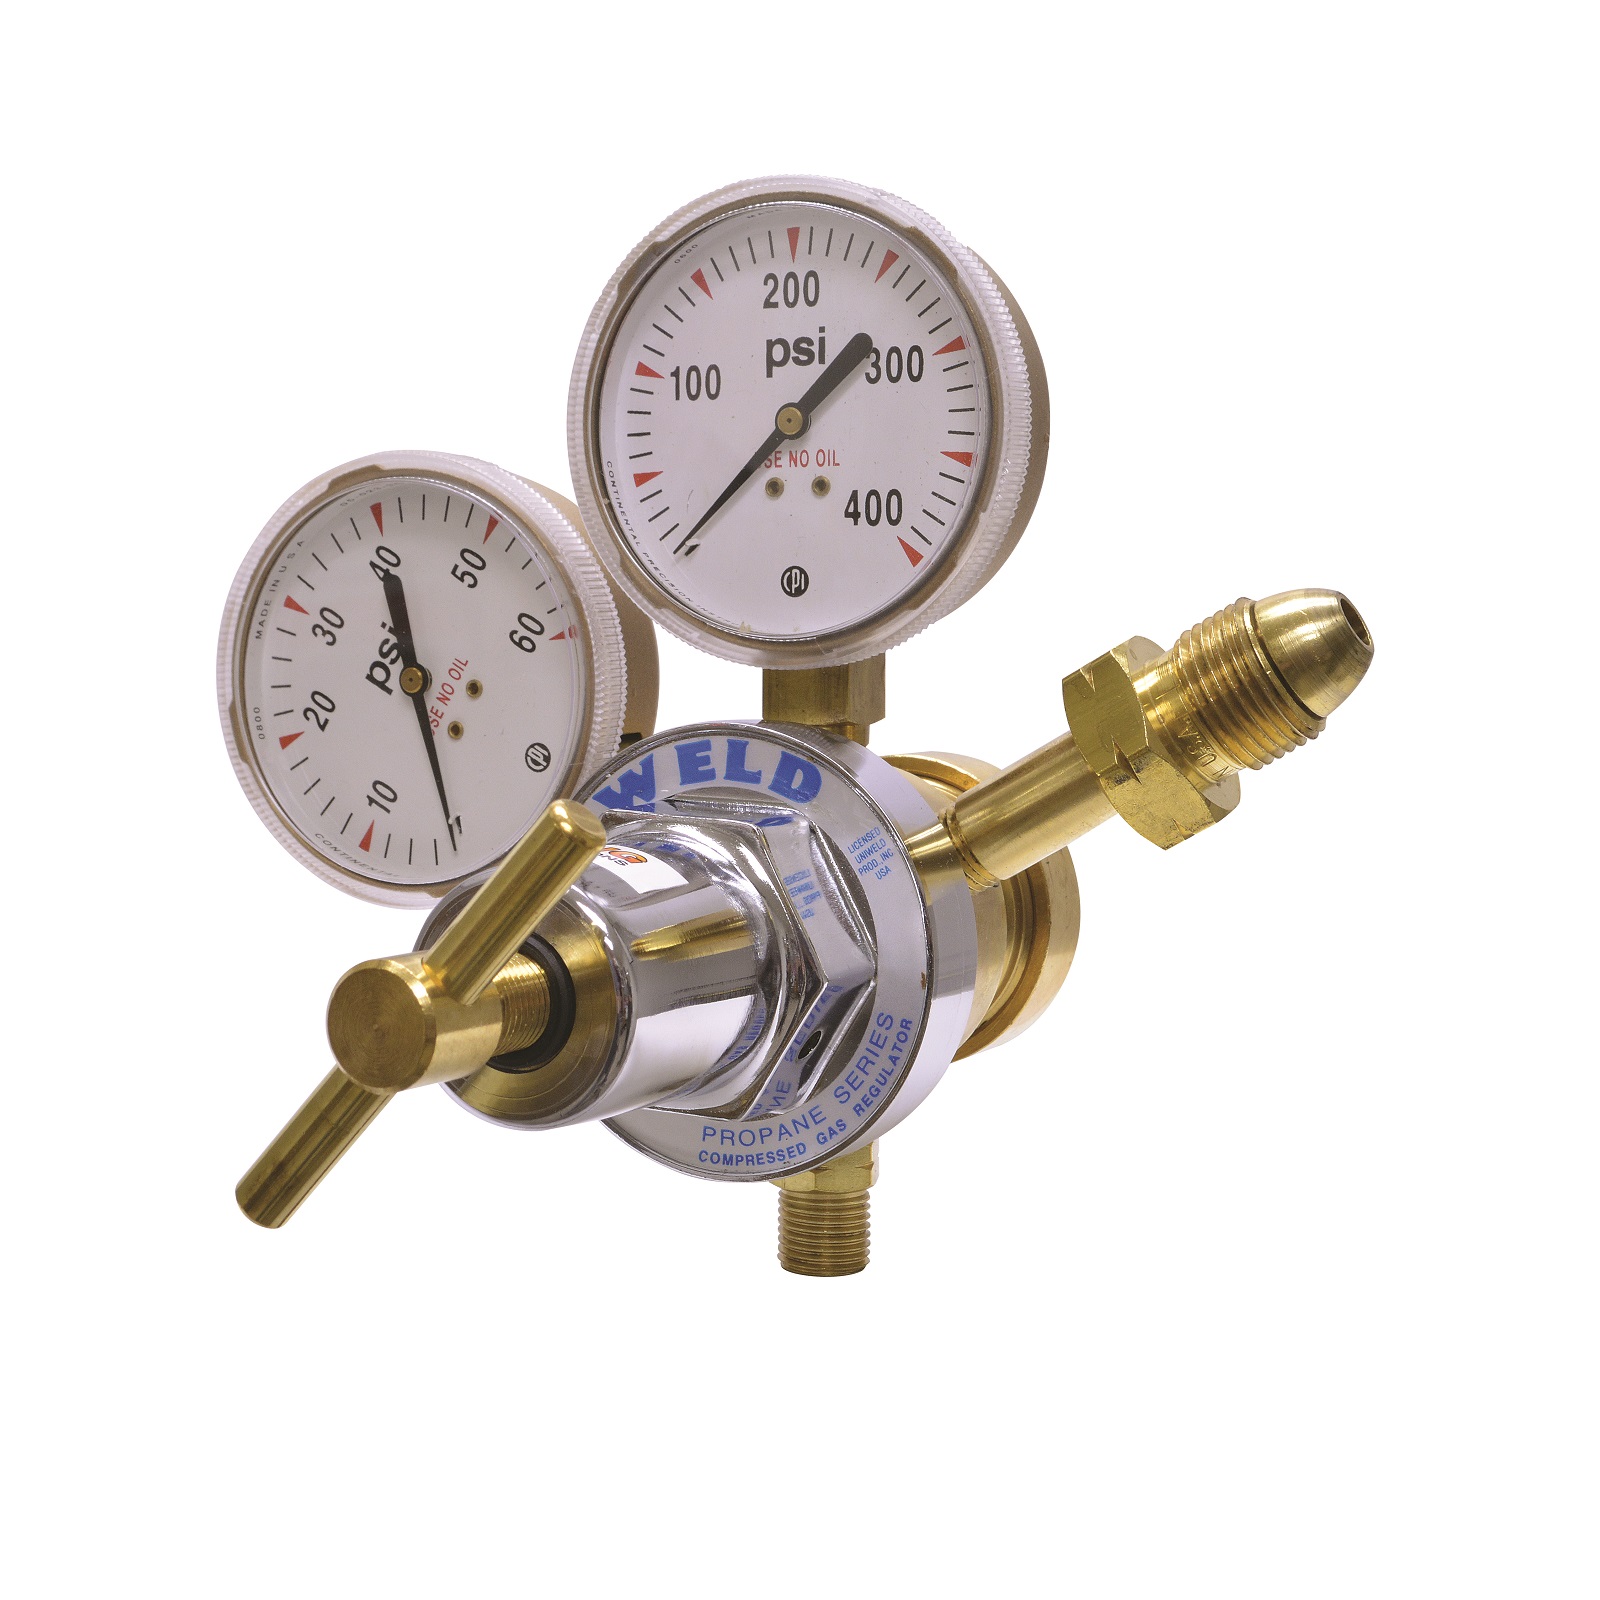 Uniweld RUH8212 Medium/Heavy Duty Single Stage LPG and All fuel gas Regulator with a CGA510 Inlet 